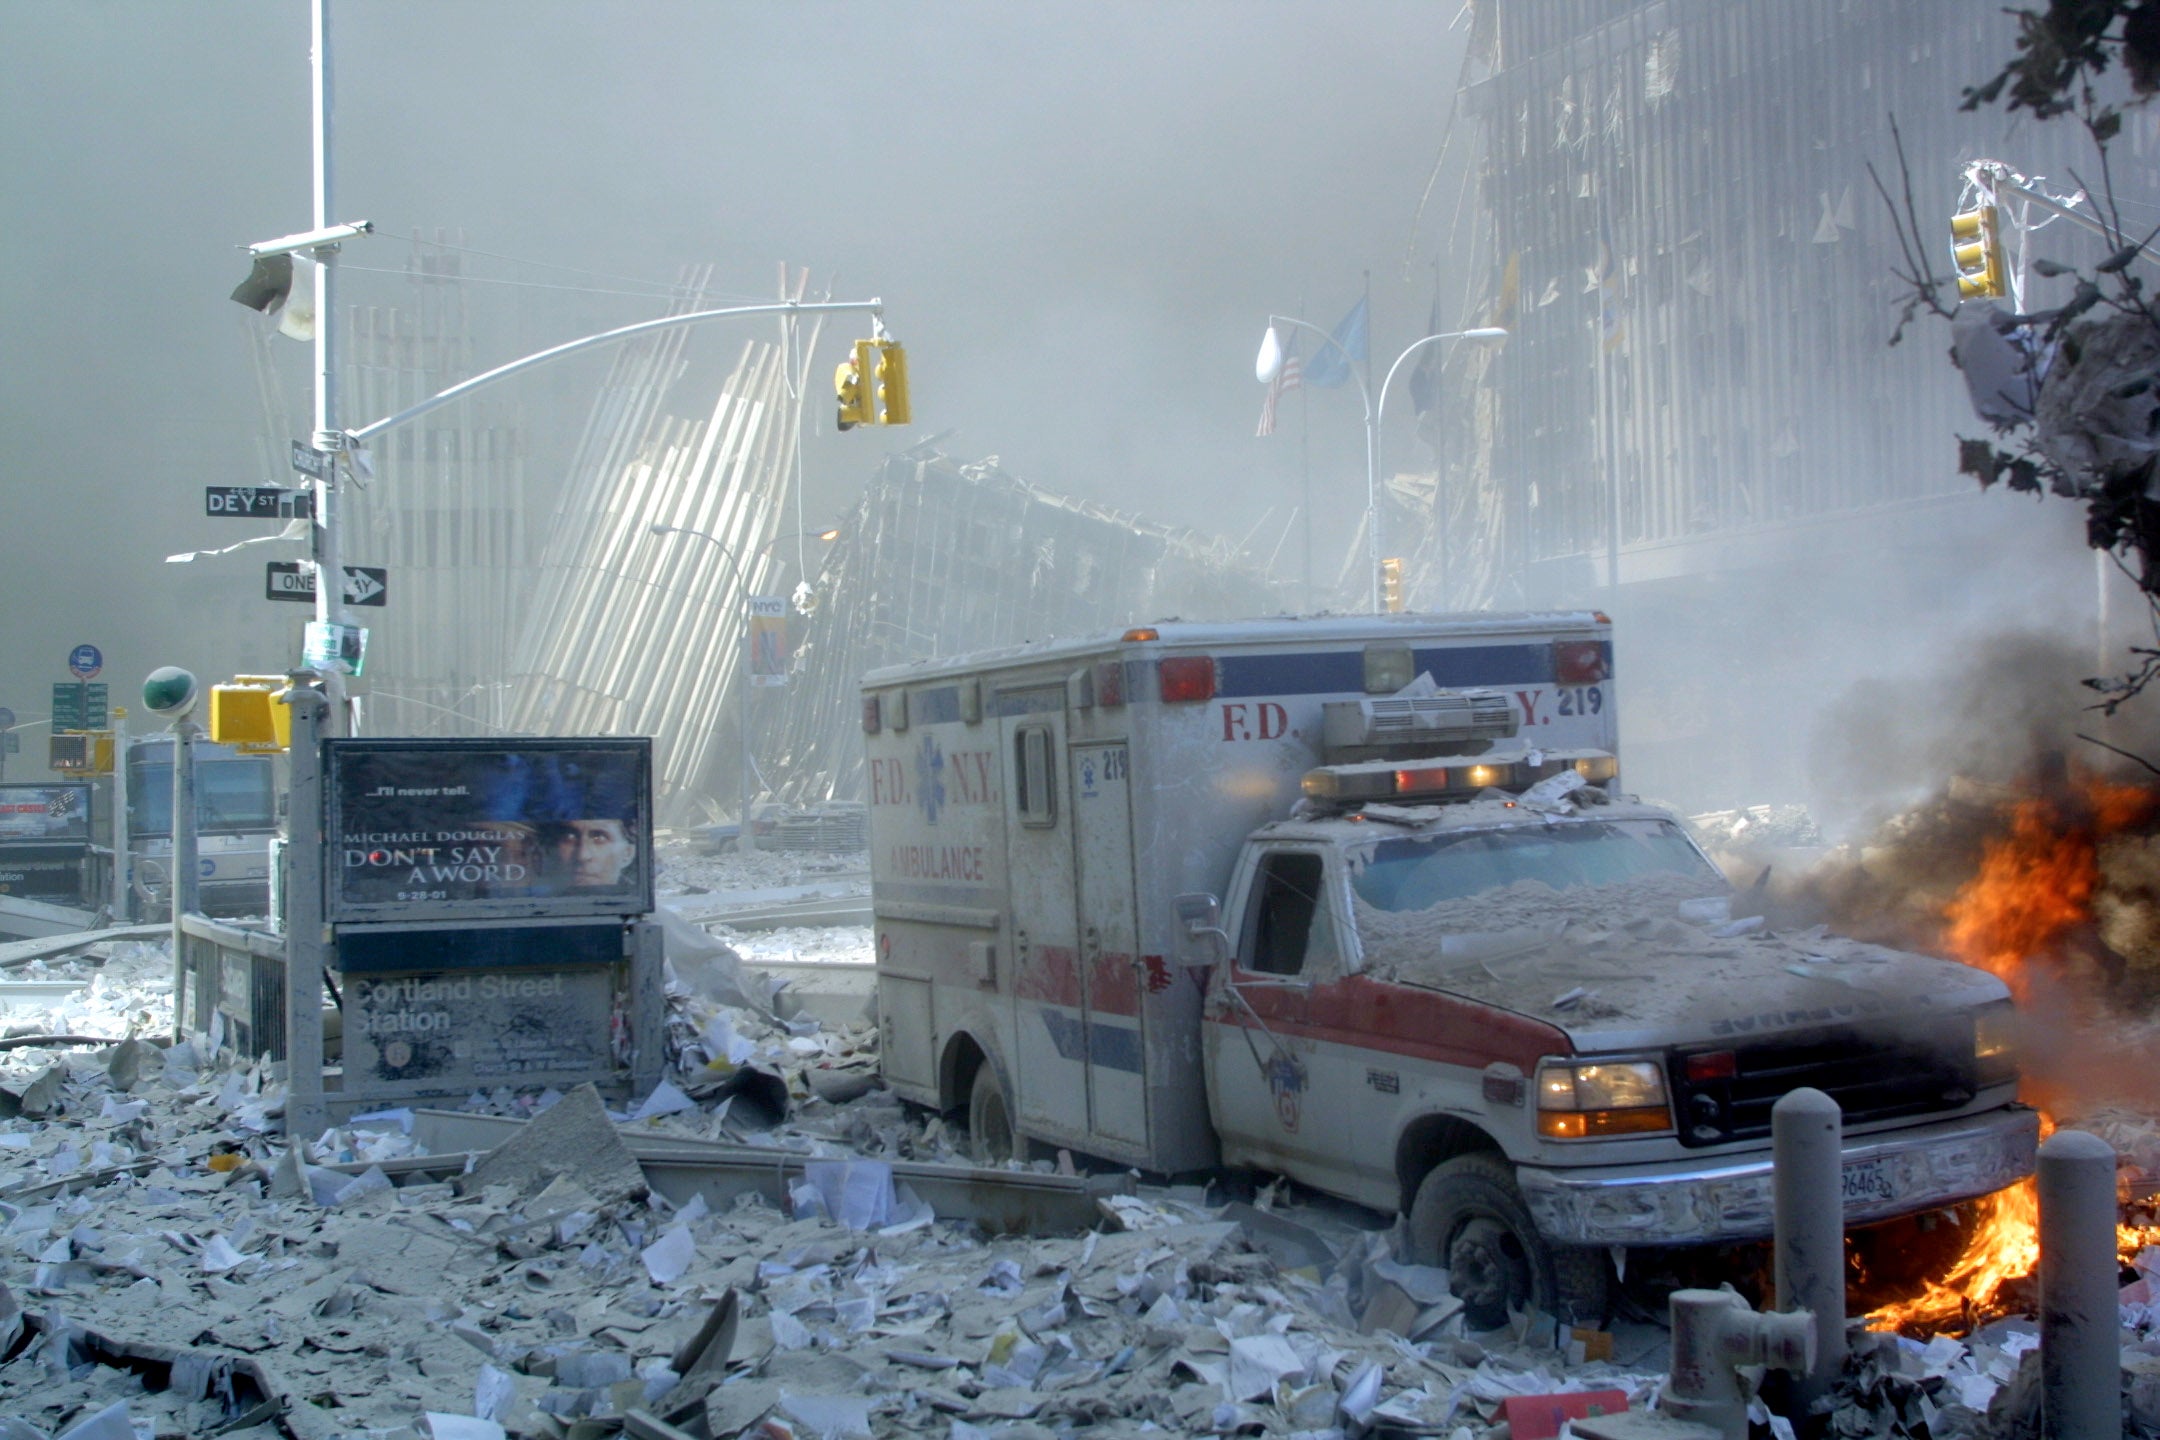 An ambulance, covered with debris and on fire, after the collapse of the first tower